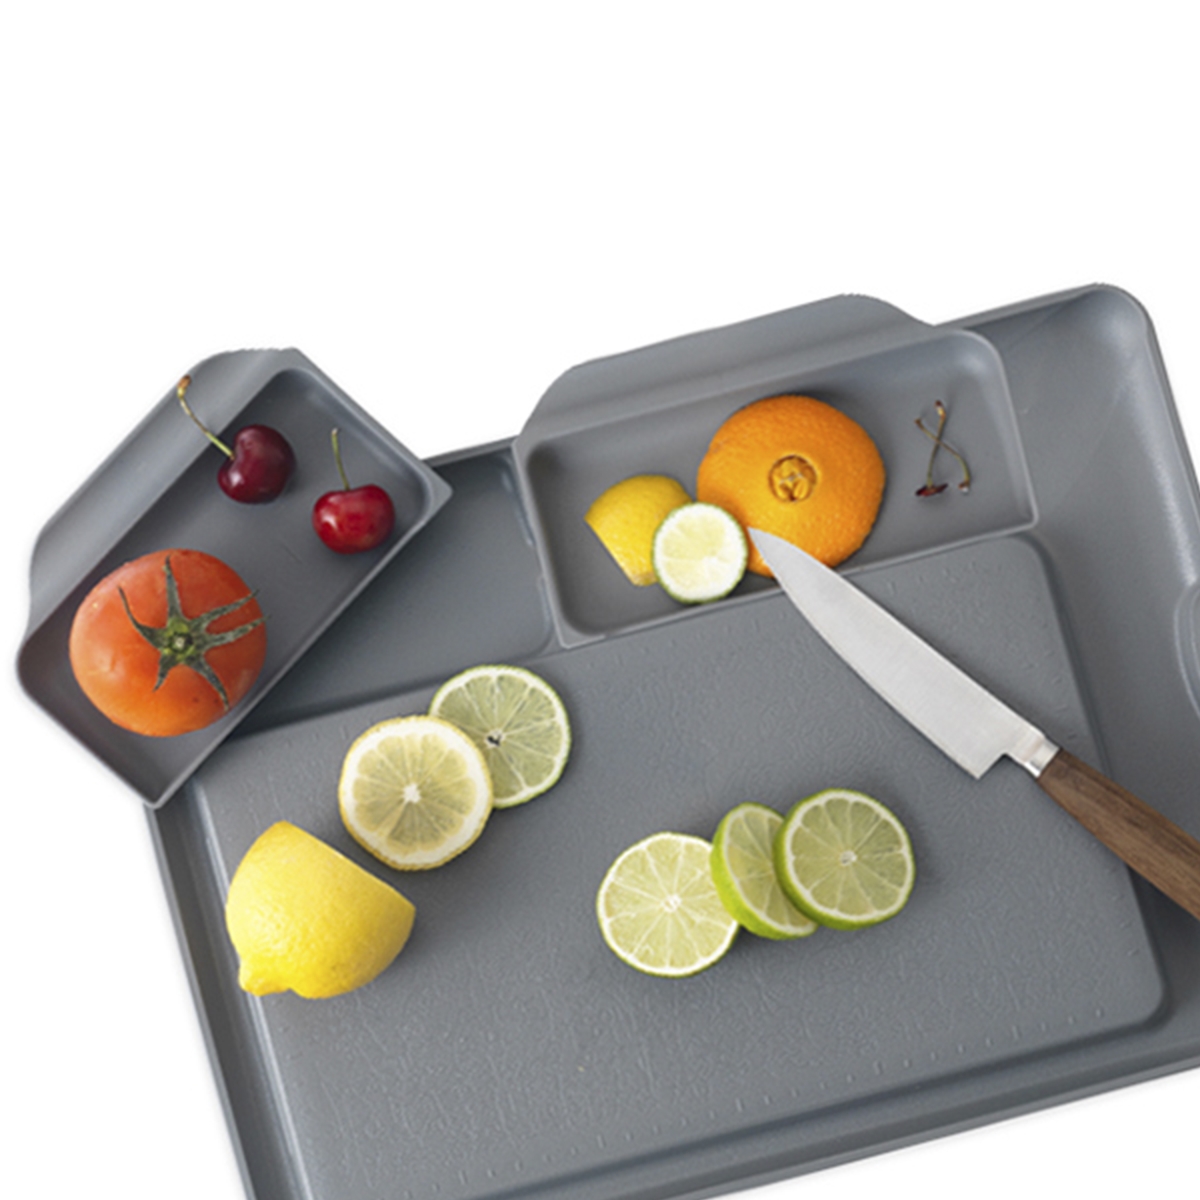 Jmg-b200s Non-slip Top Side Removable Compartments With Grooves & Serving Tray, Gray